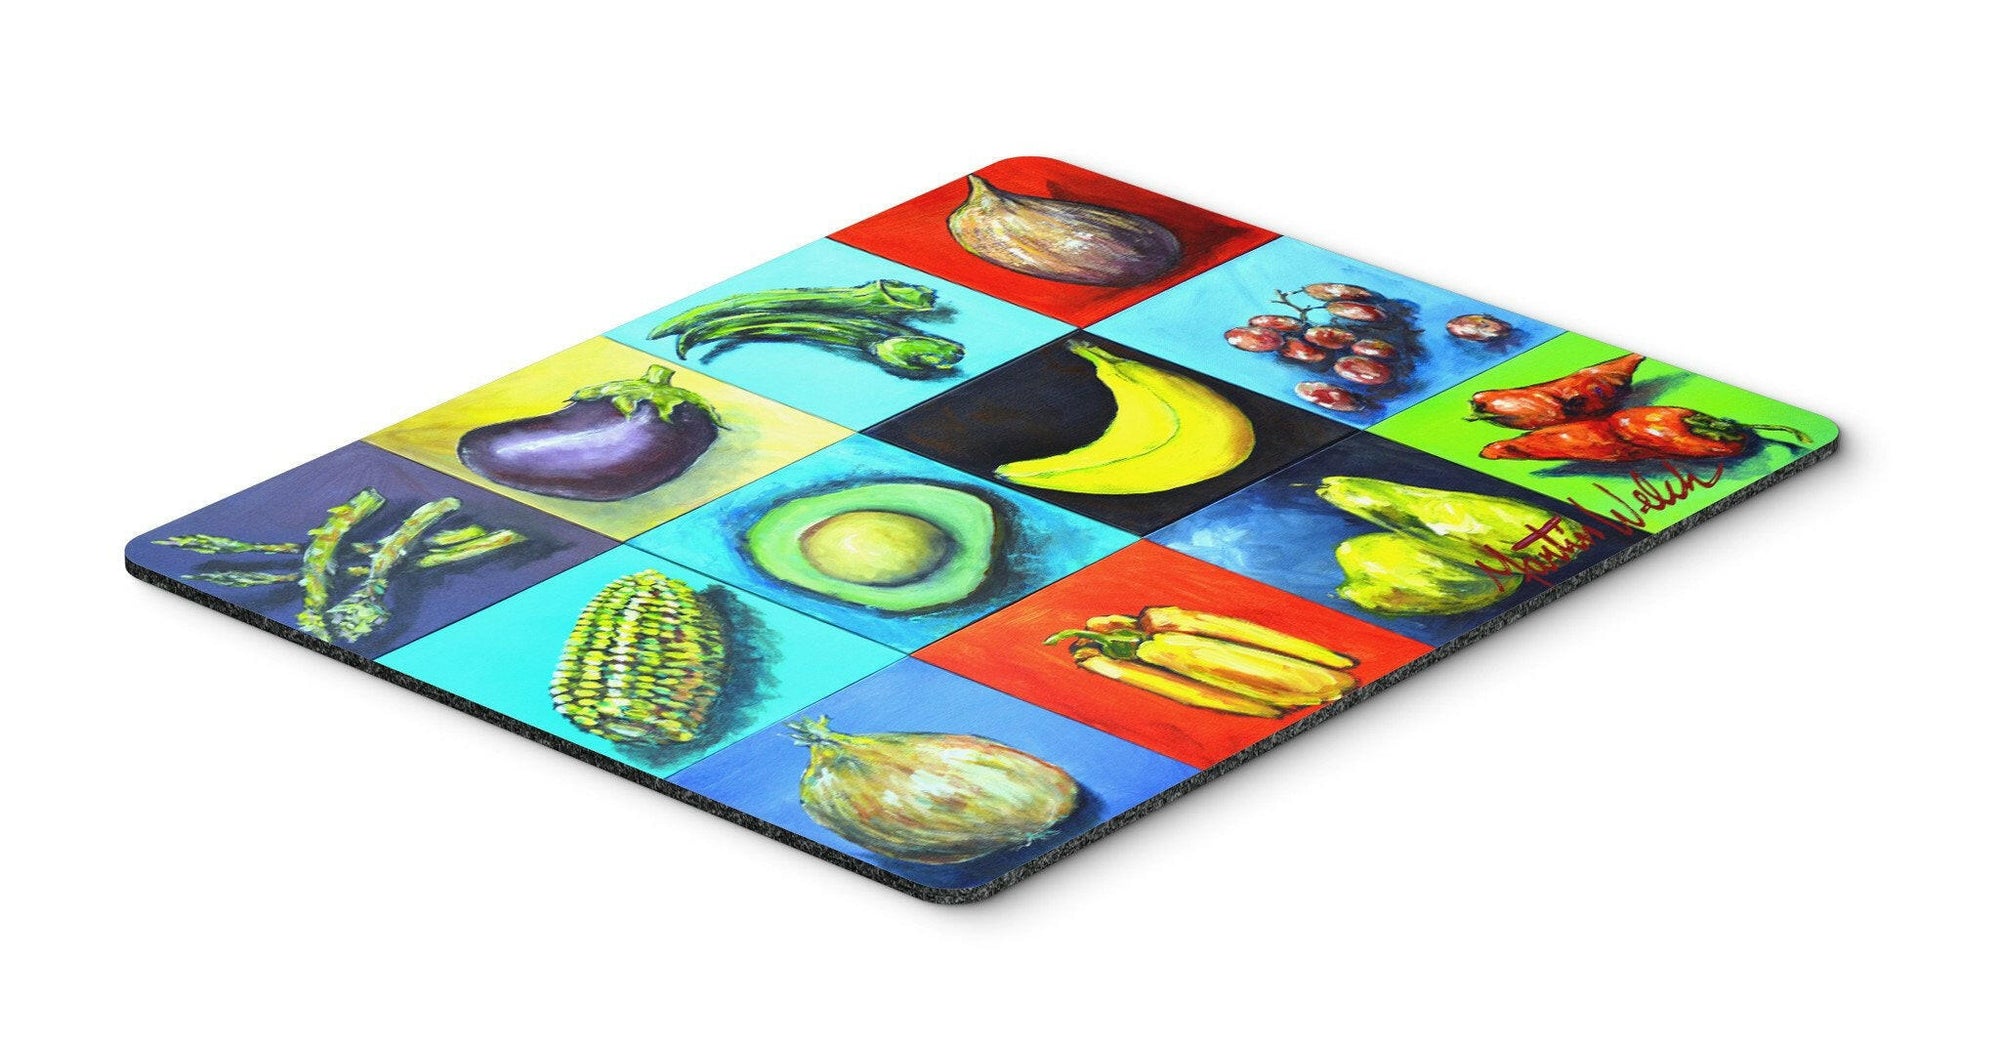 Mixed Fruits and Vegetables Mouse Pad, Hot Pad or Trivet MW1227MP by Caroline's Treasures